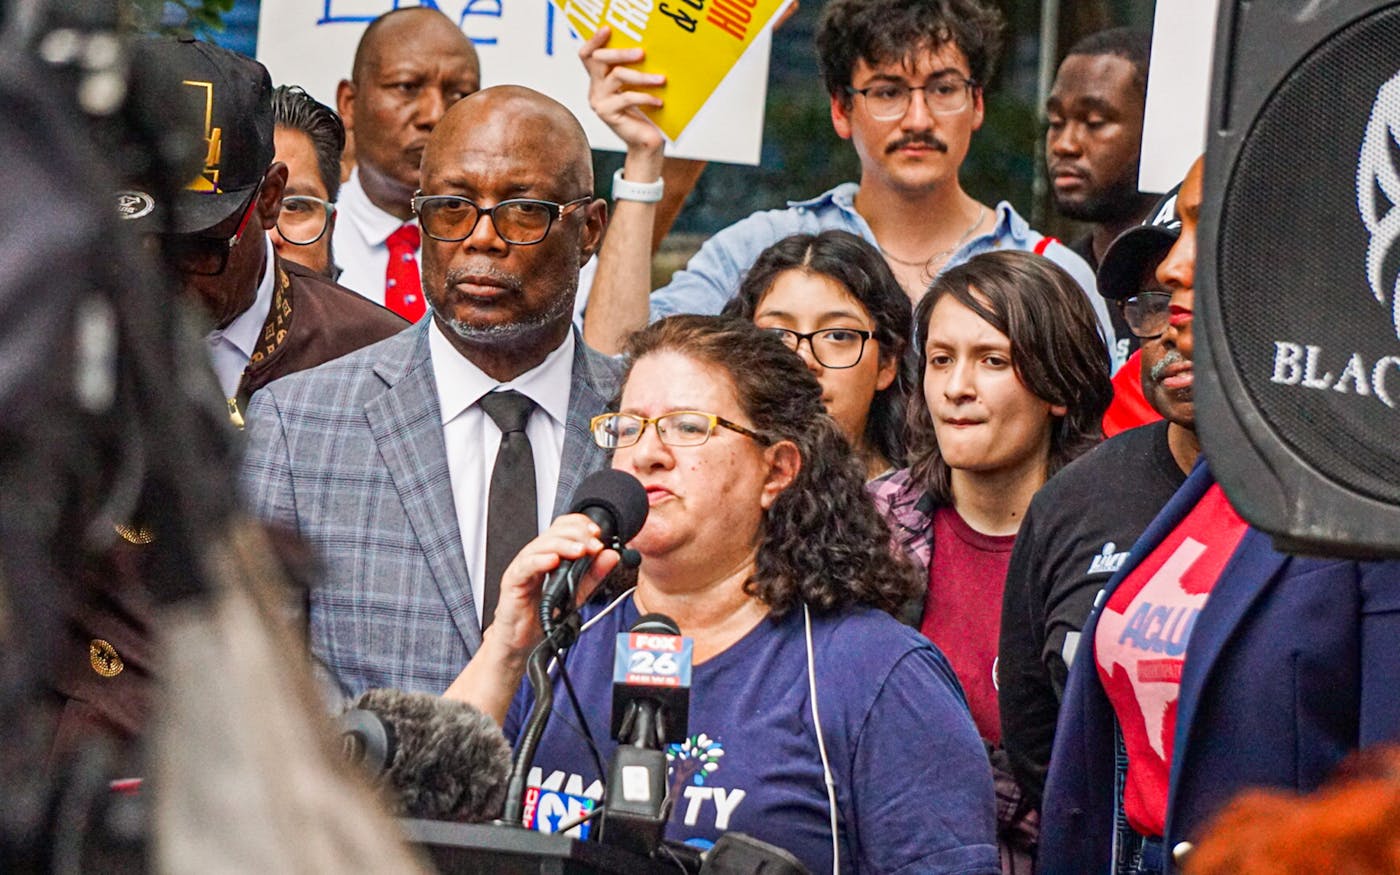 https://img.texasmonthly.com/2023/10/Ruth-Kravetz-retired-teacher-HISD-Houston-Independent-School-District-protest-state-takeover.jpg?auto=compress&crop=faces&fit=crop&fm=jpg&h=1050&ixlib=php-3.3.1&q=45&w=1400